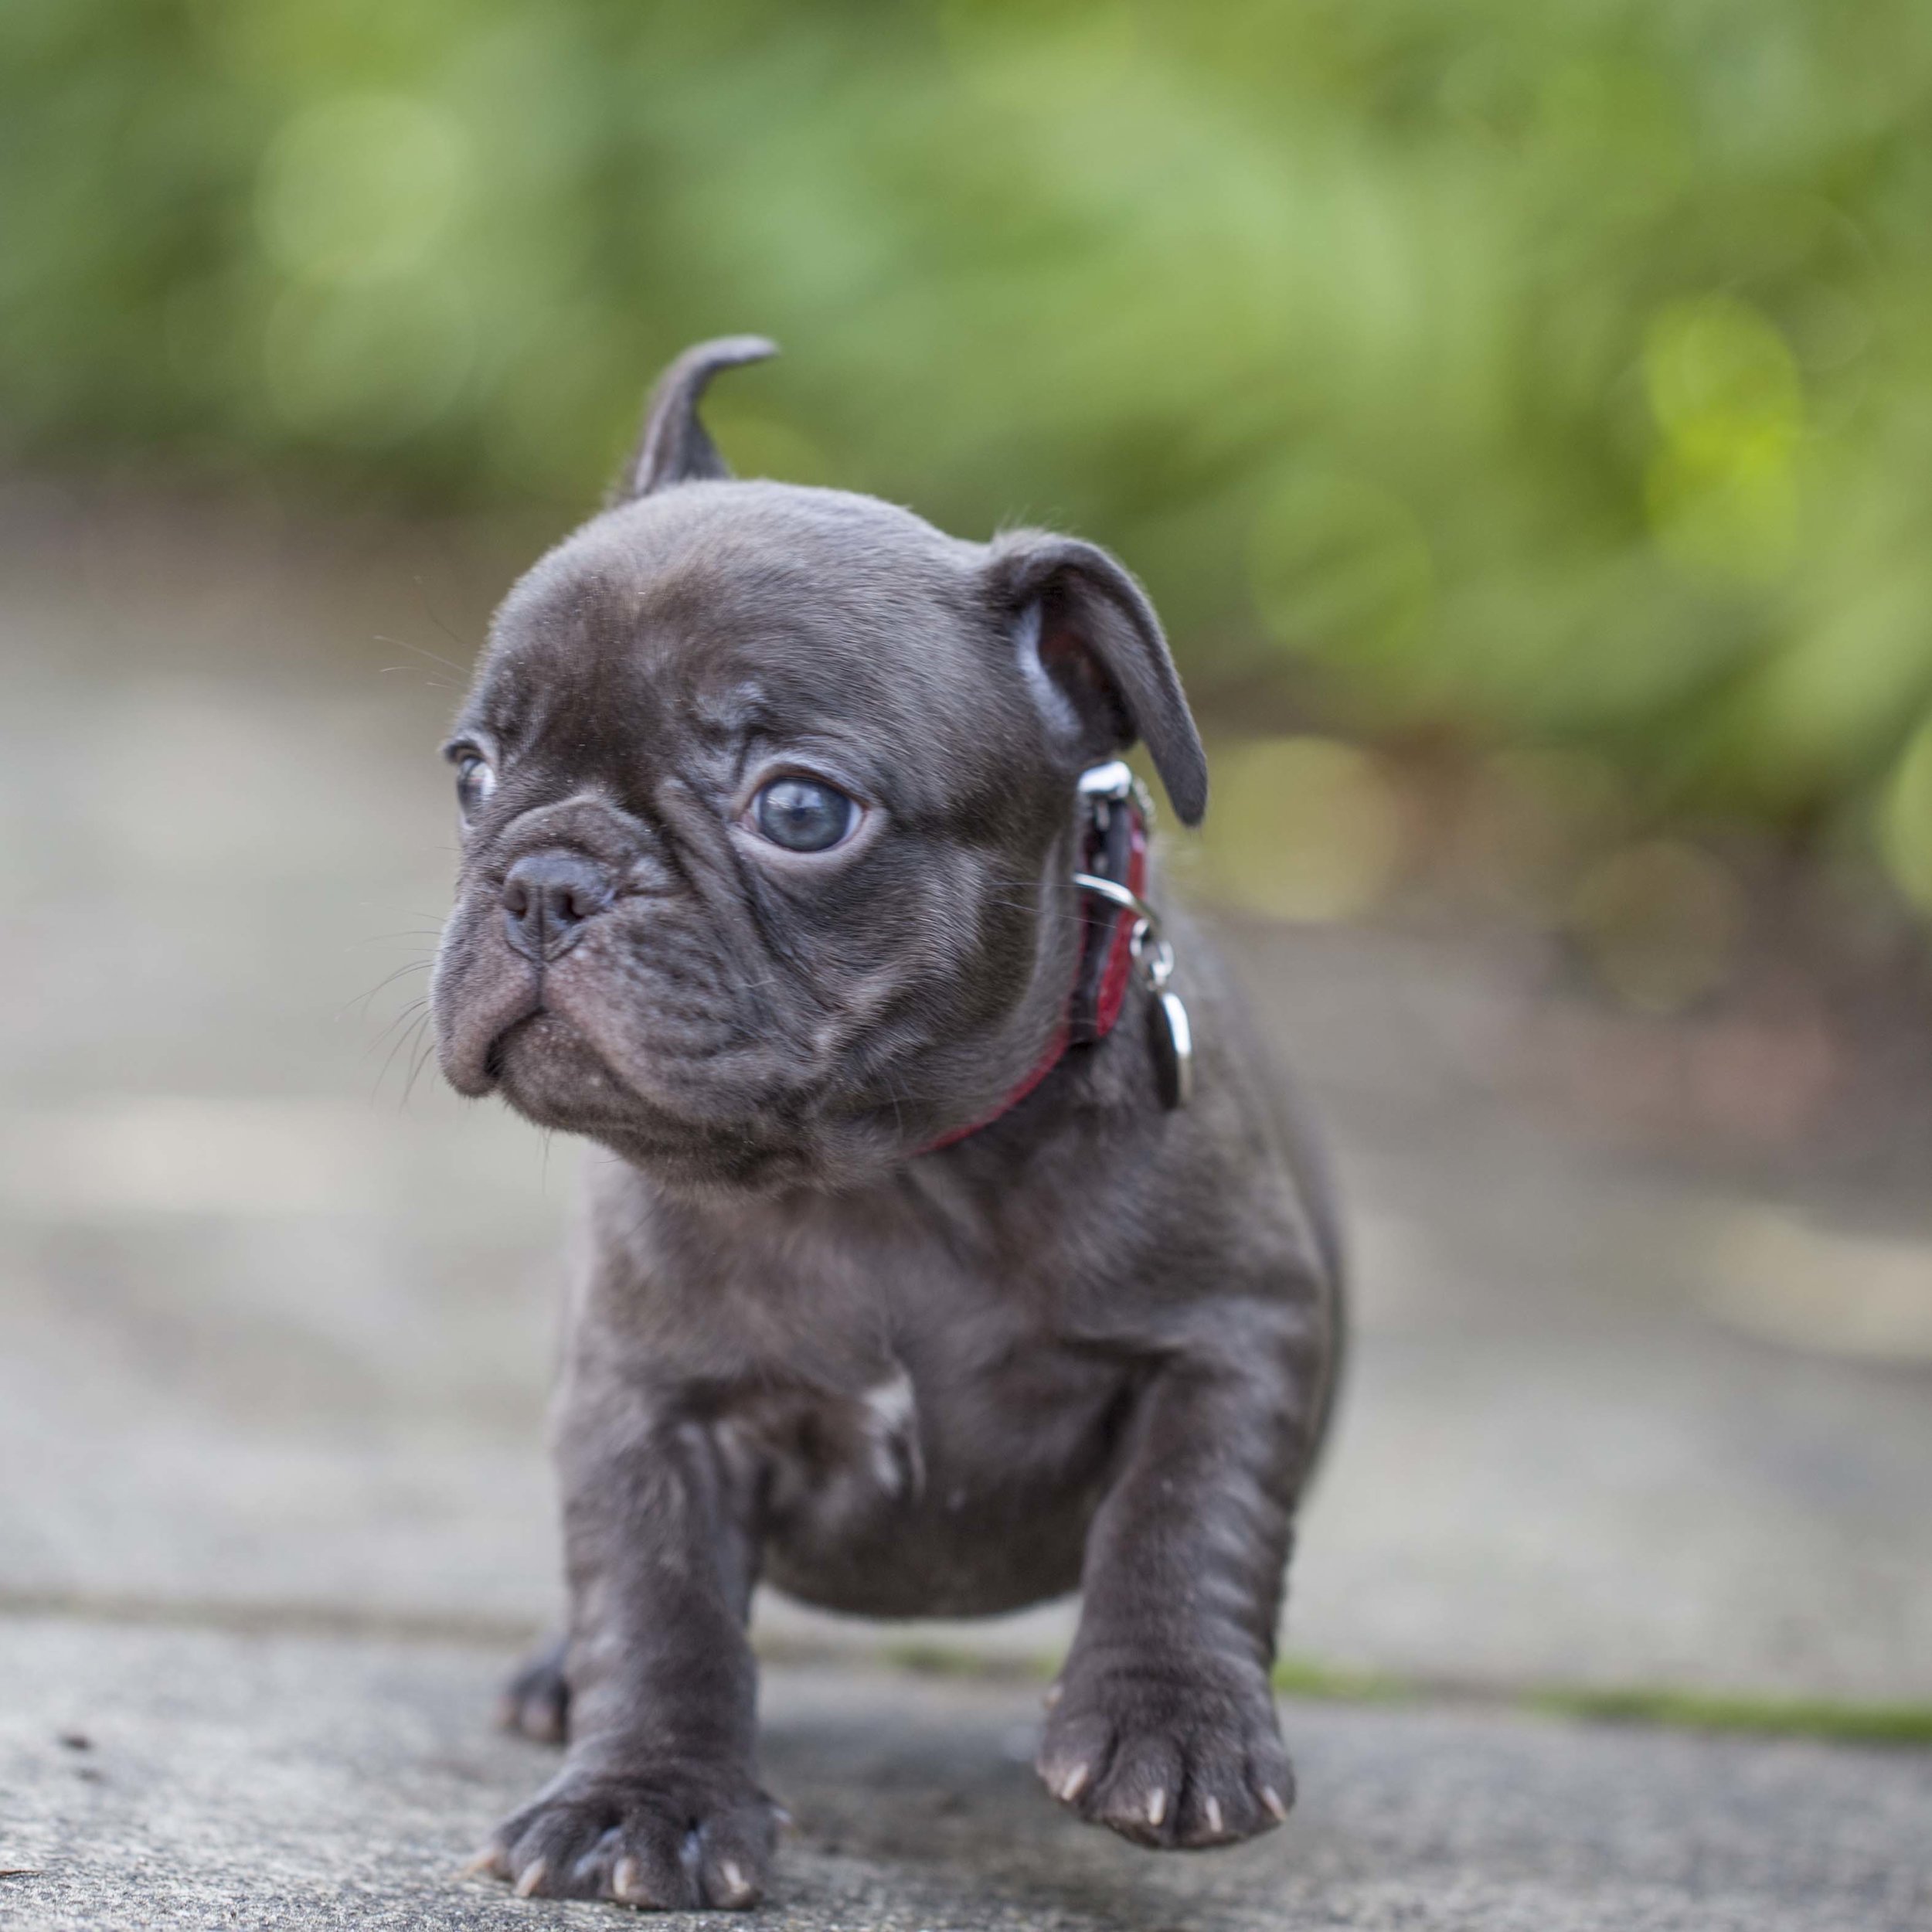 When Will my French Bulldog's Ears Stand Up? NW